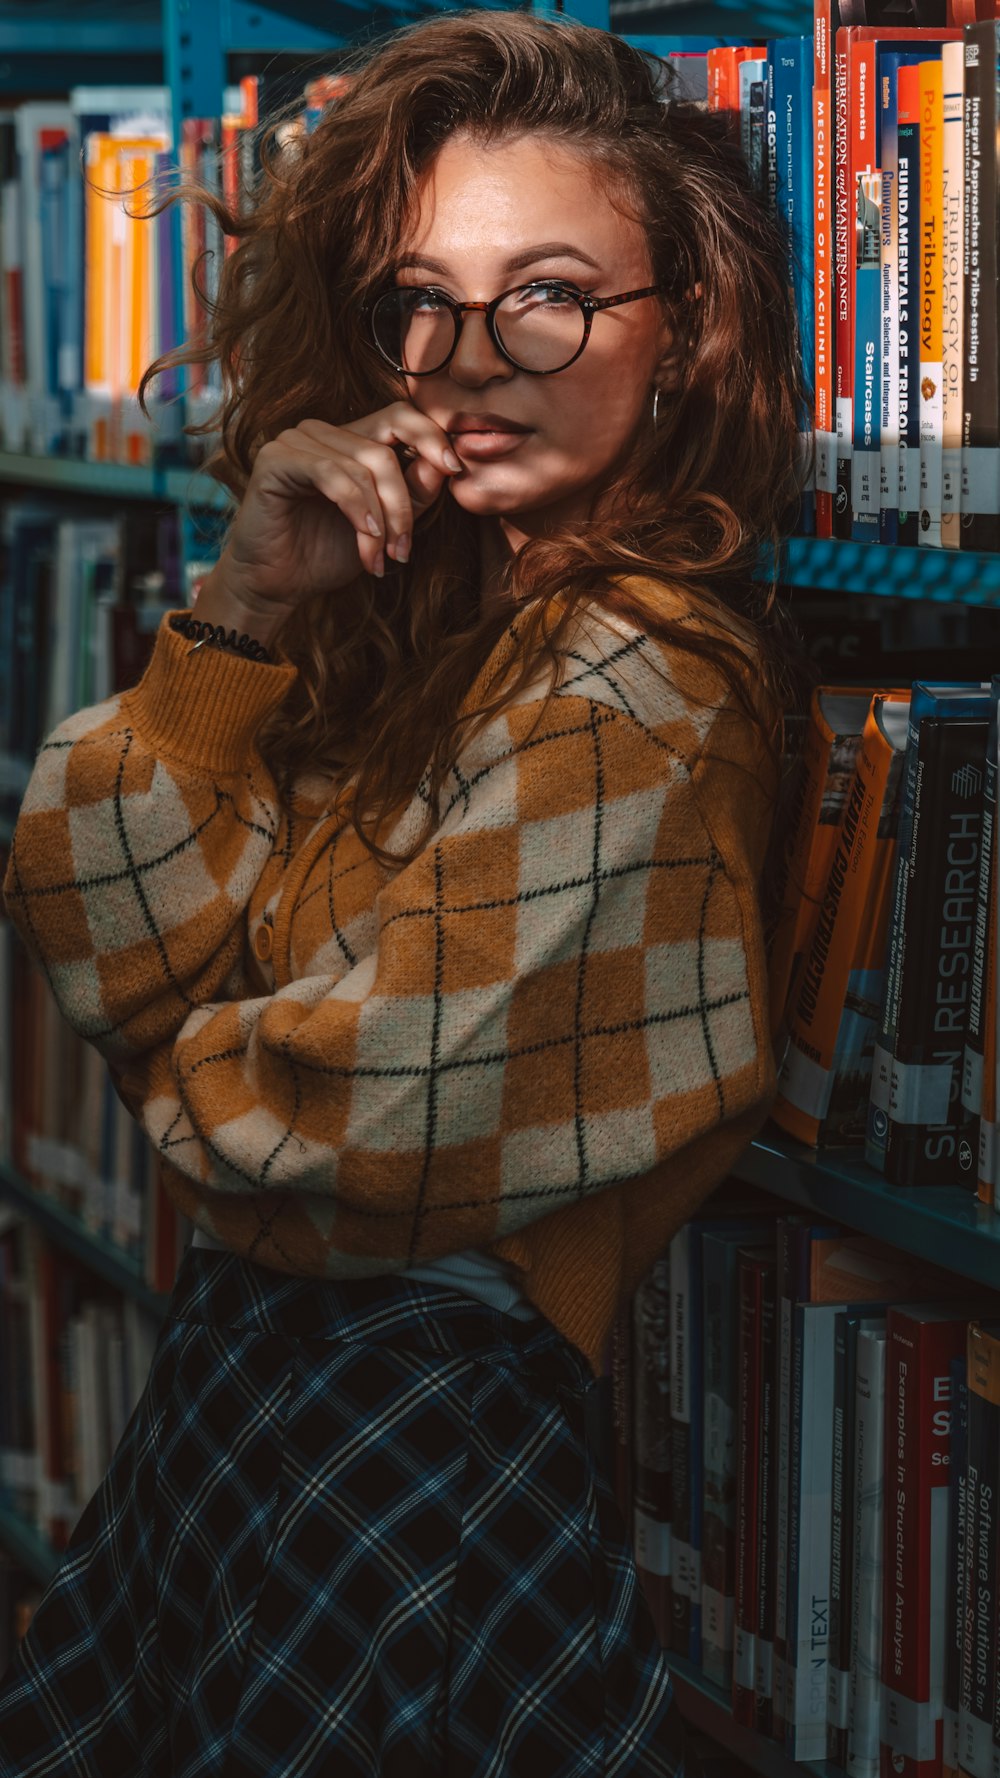 a woman in a library leaning on a book shelf